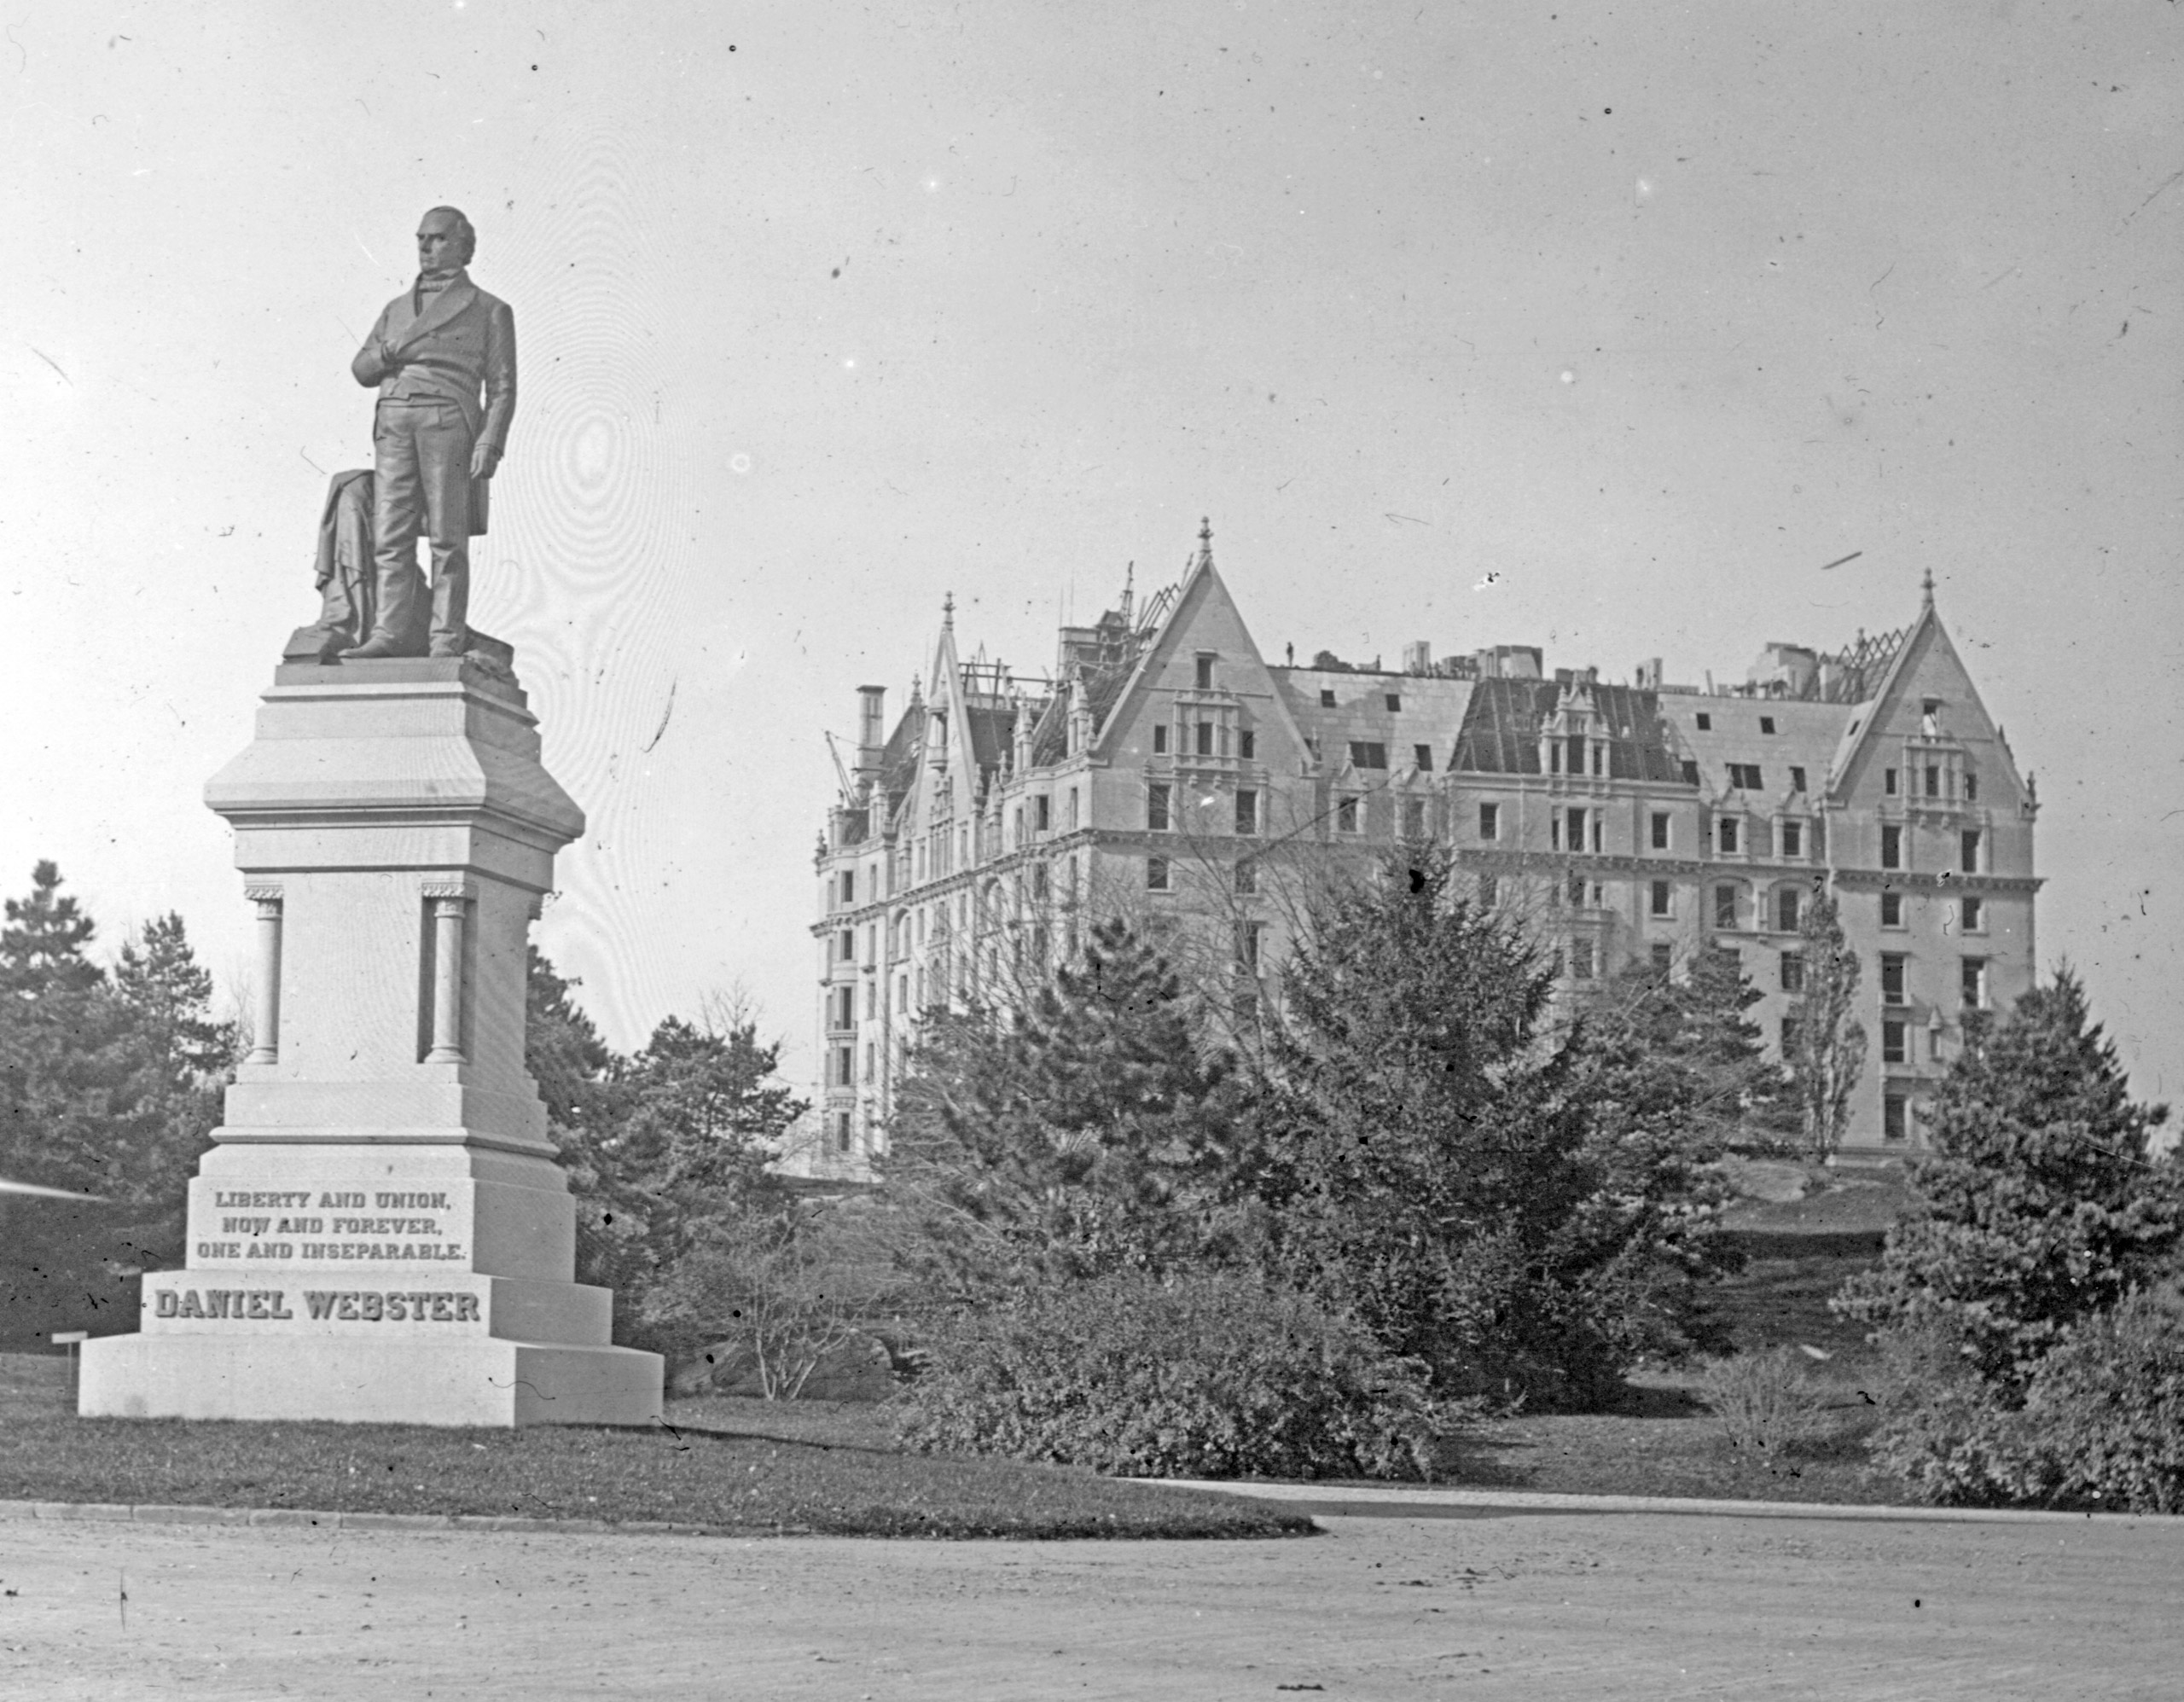 Perhaps the earliest known image of the Dakota, while still under construction. The Central Park statue of Daniel Webster, in bronze on a granite pedestal, was sculpted by Thomas Ball and erected in 1876, only four years before work on the Dakota was begun.